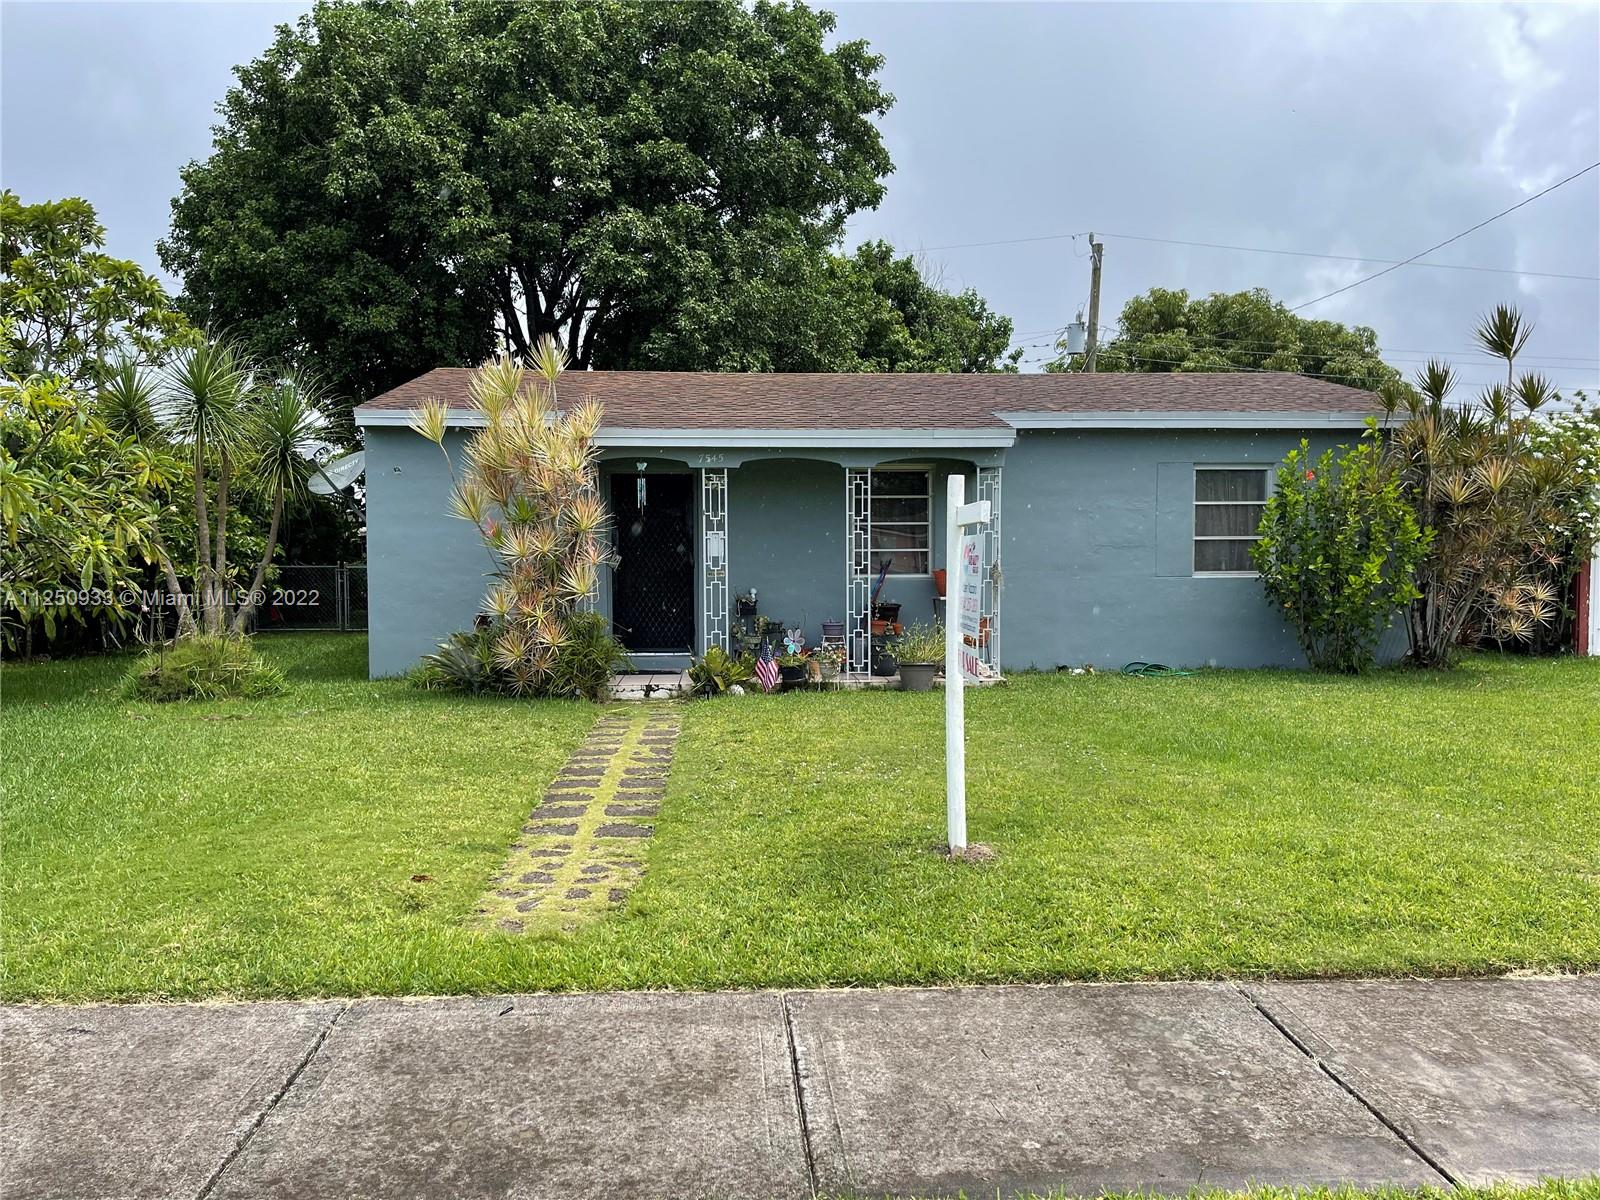 7545 SW 31st St, Miami, Florida 33155, 3 Bedrooms Bedrooms, ,1 BathroomBathrooms,Residential,For Sale,7545 SW 31st St,A11250933